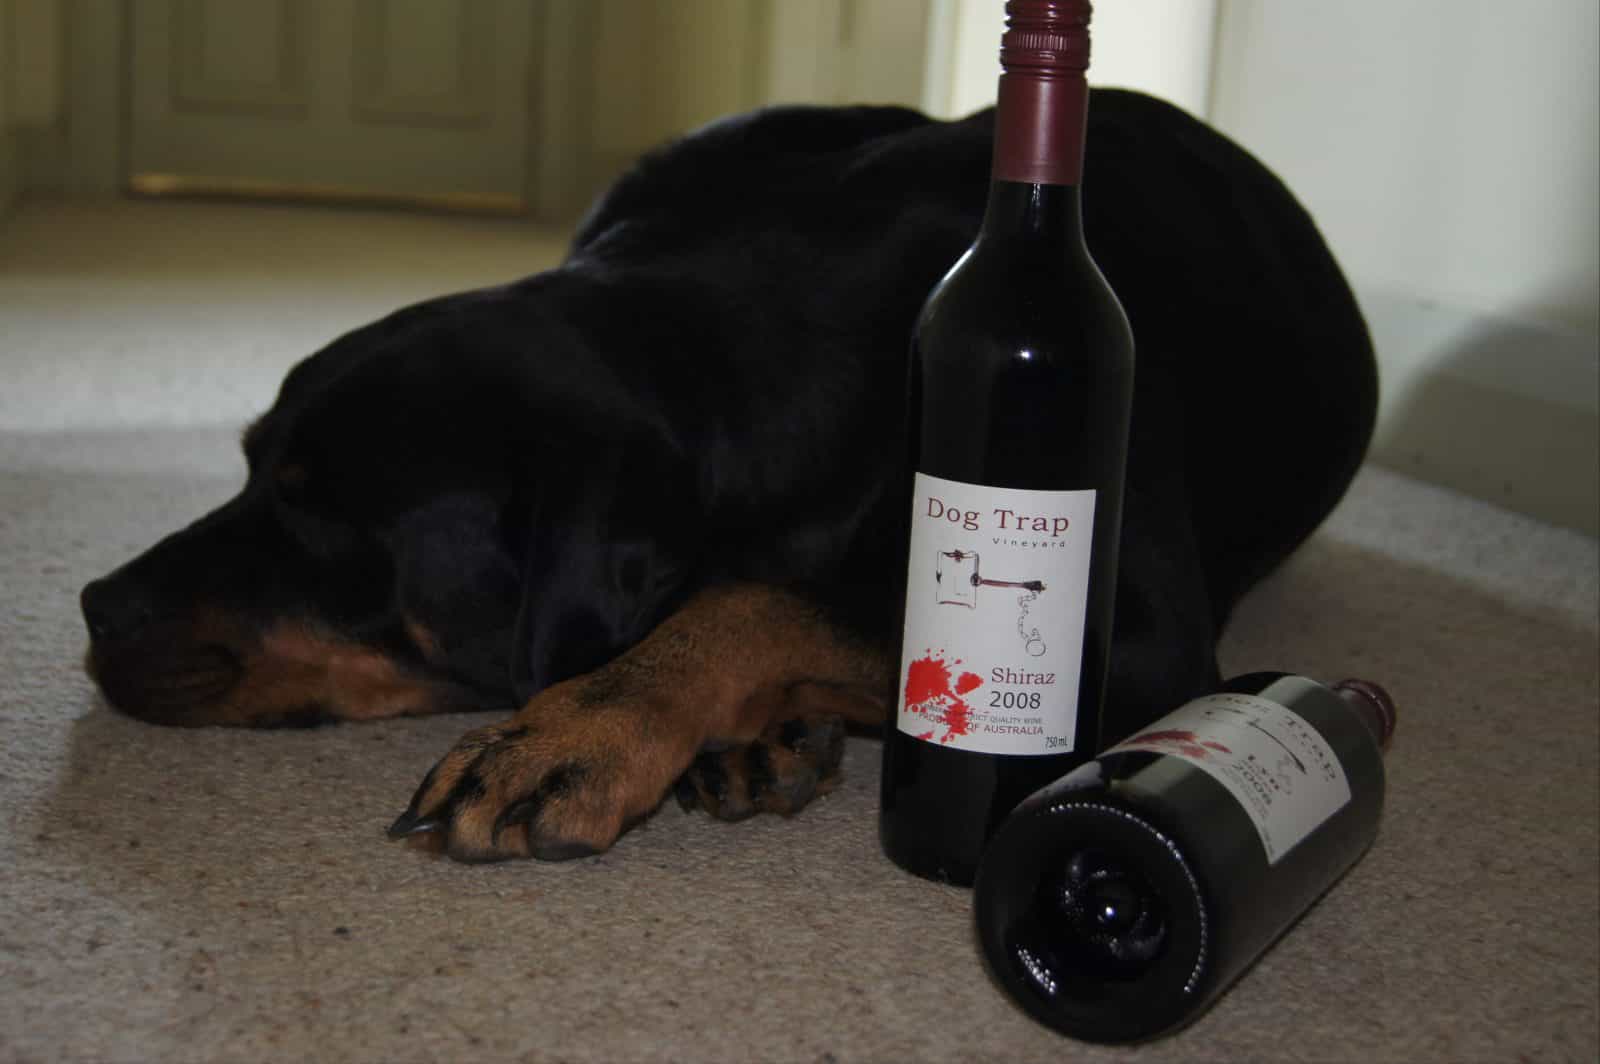 Dog Trap's wine and their dog